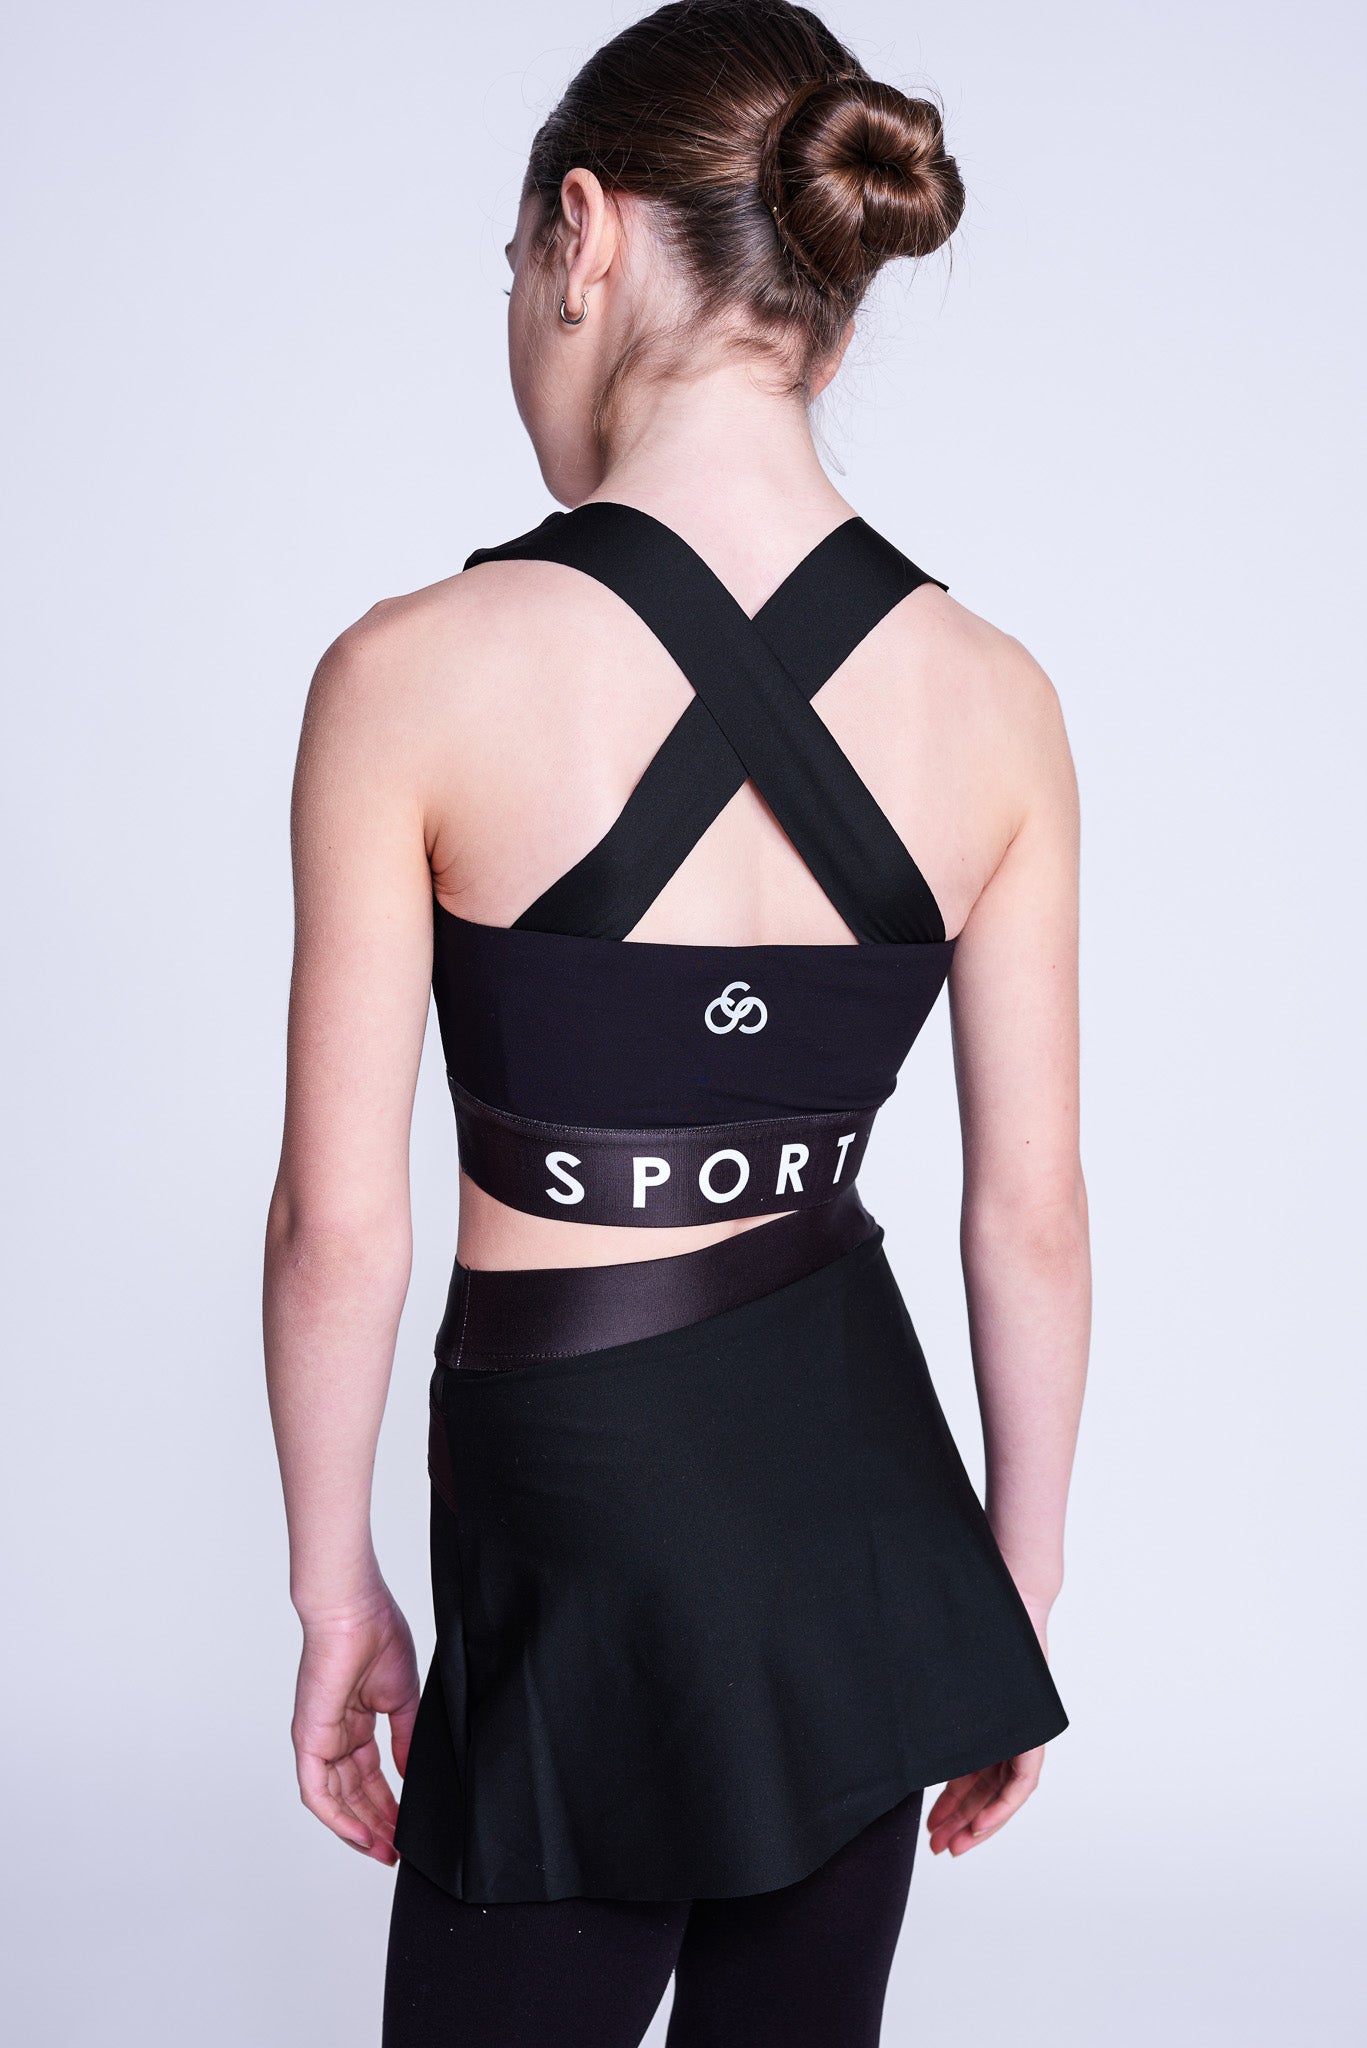 Chique Sport - Spiral in the 𝙁𝙞𝙚𝙧𝙘𝙚 𝙎𝙝𝙤𝙧𝙩𝙨𝙪𝙞𝙩🌪 ​ ​Get yours  at chiquesport.com #ChiqueSport